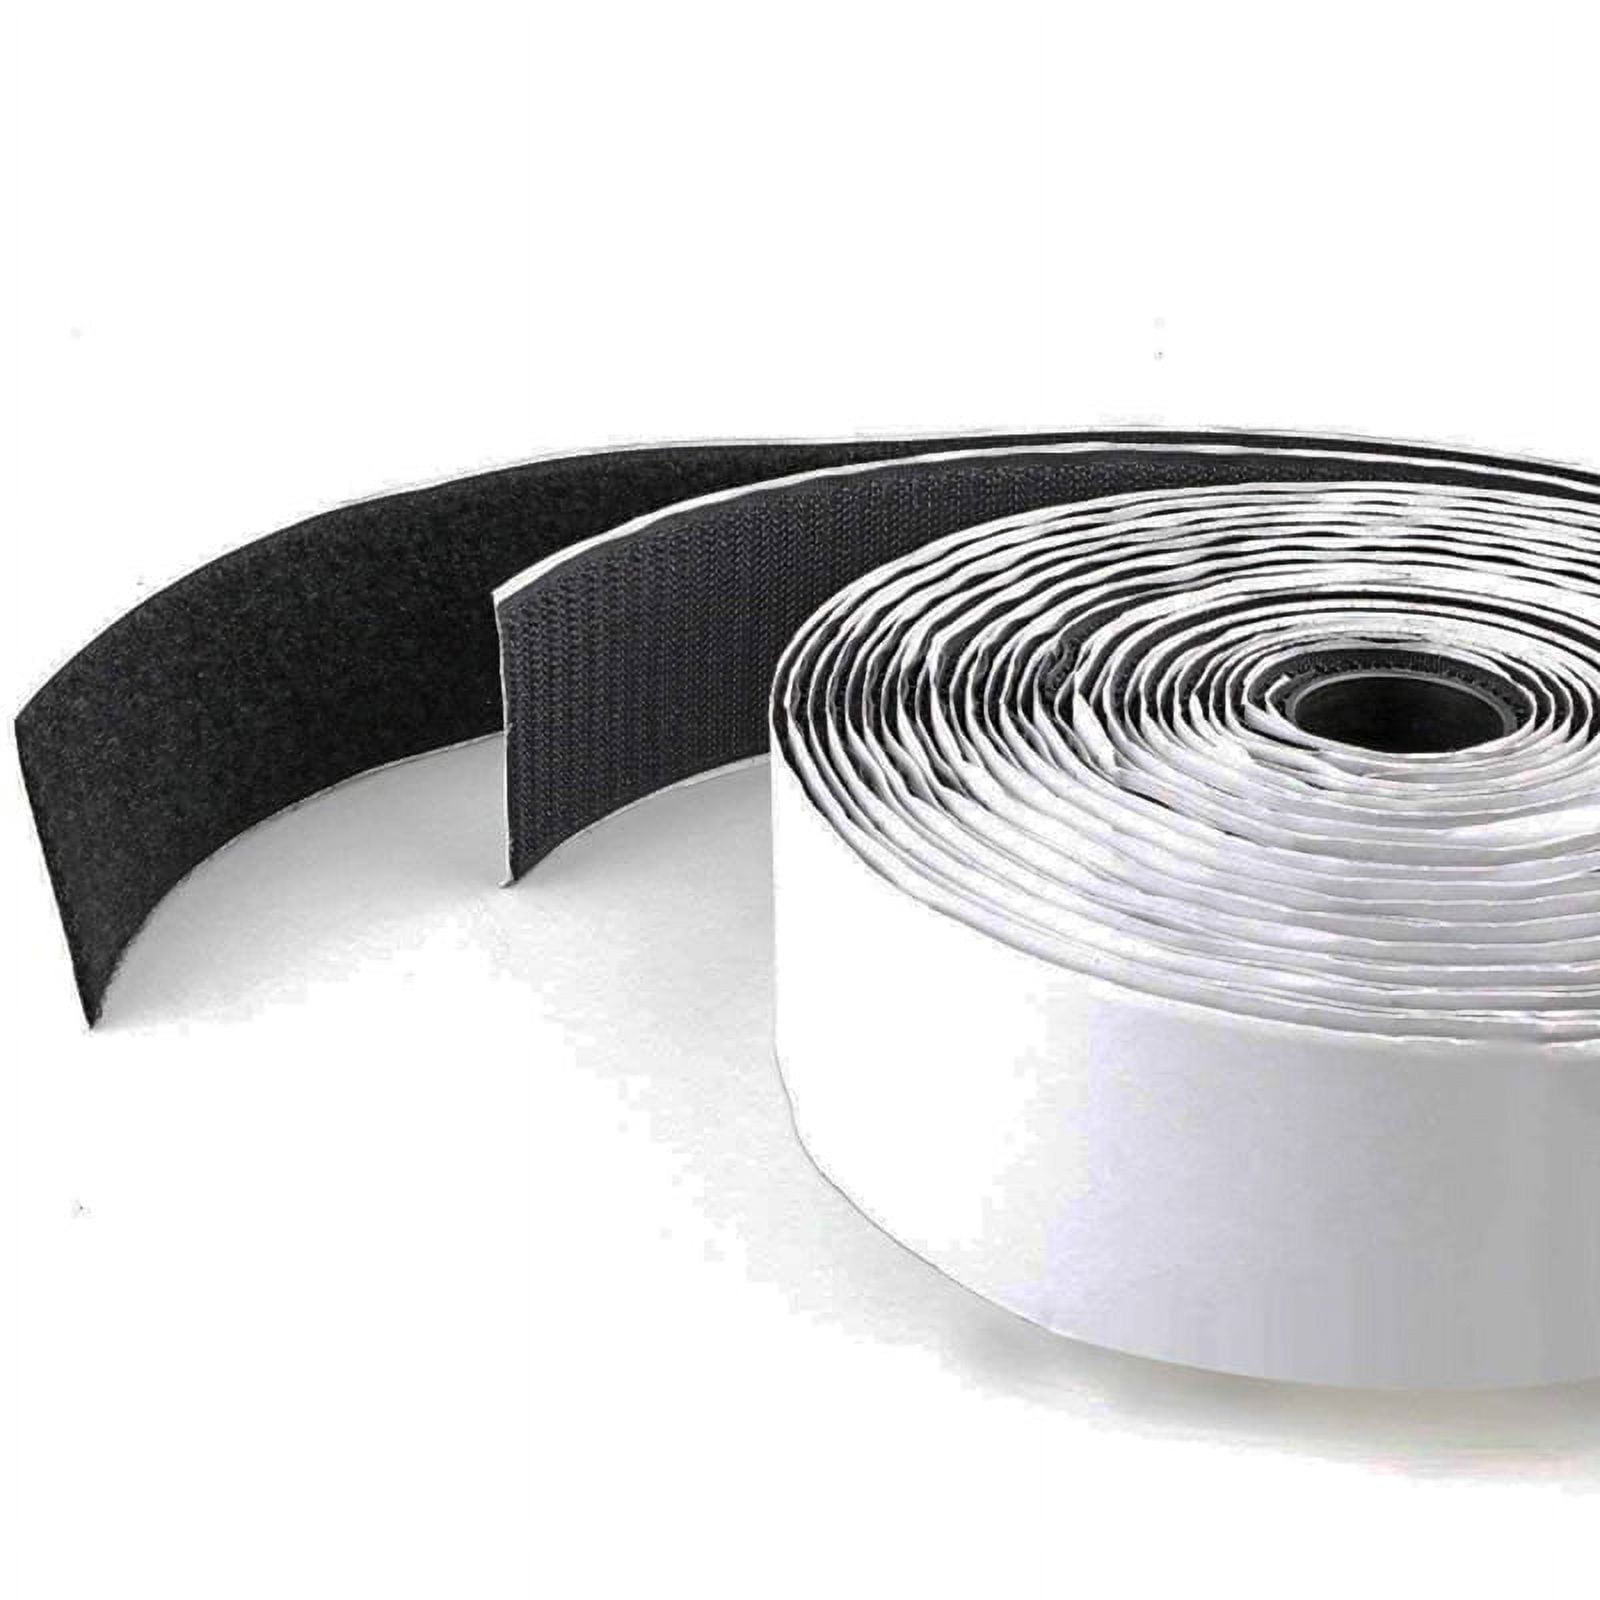 Self Adhesive Hook and Loop Tape Sticky Back Fastening Tape (Black,  26ft*2in)